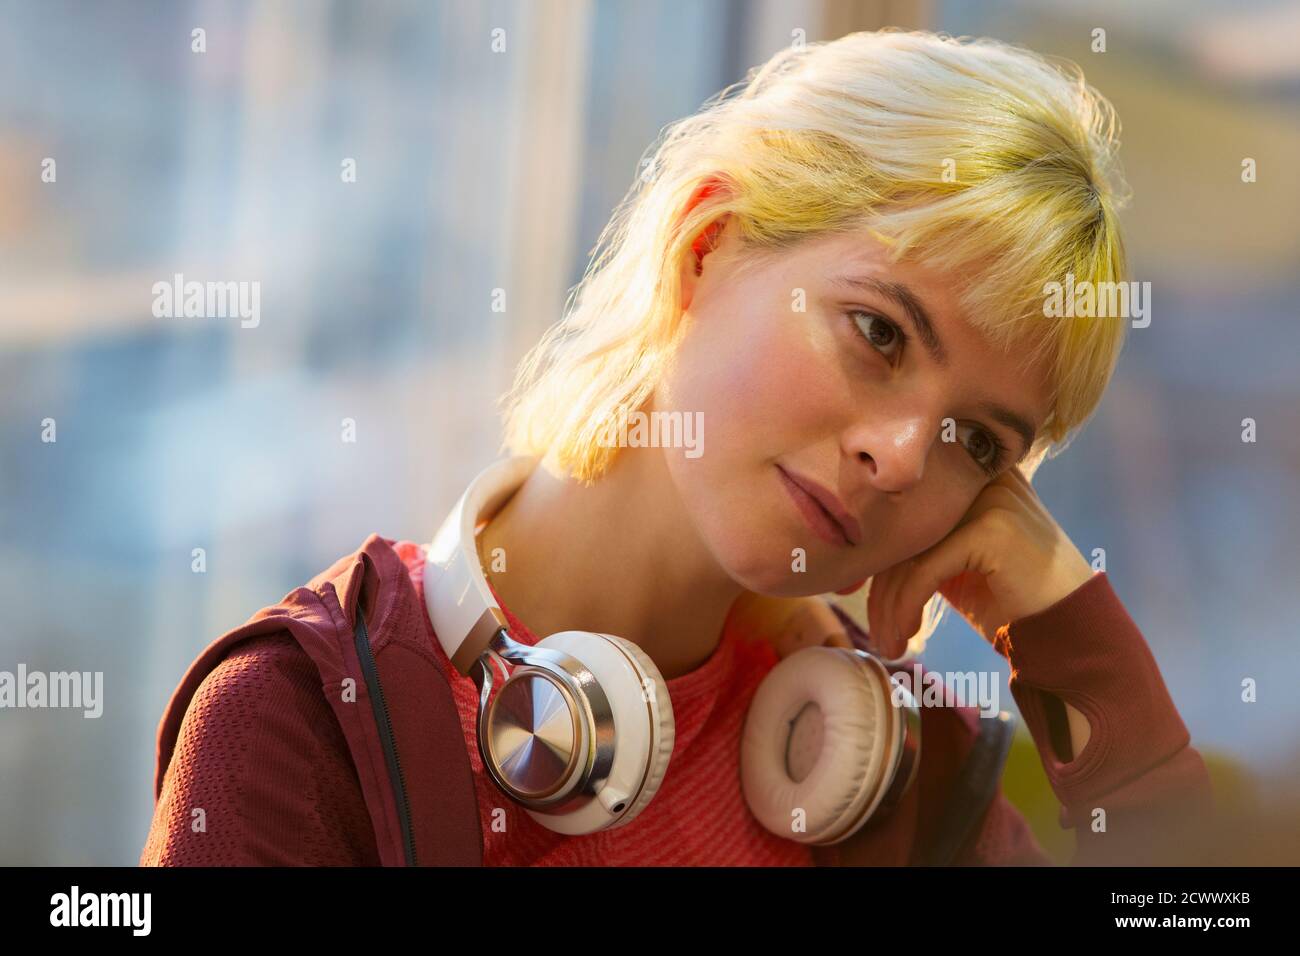 Thoughtful young woman with headphones Stock Photo